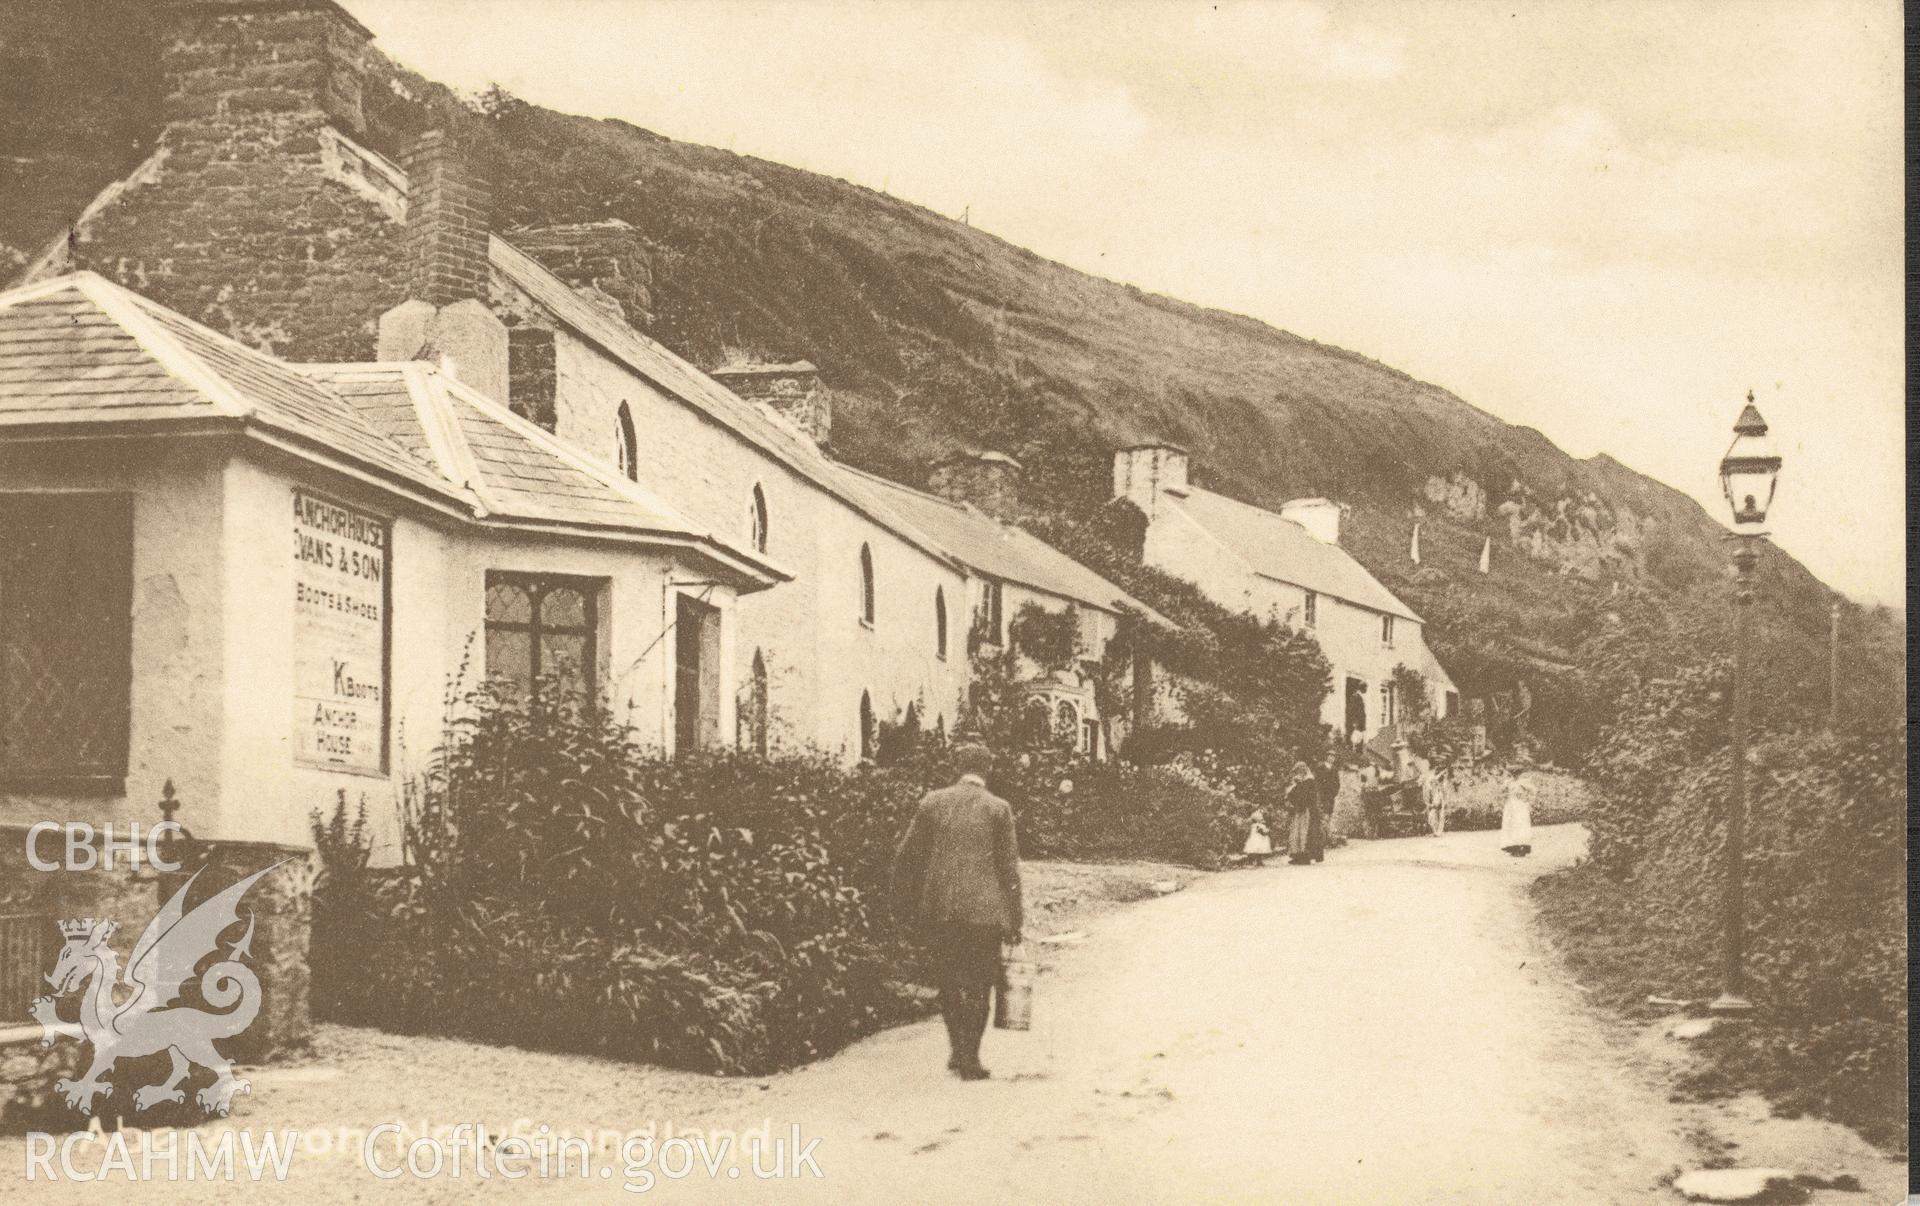 Digitised postcard image of Newfoundland Terrace, Aberaeron. Produced by Parks and Gardens Data Services, from an original item in the Peter Davis Collection at Parks and Gardens UK. We hold only web-resolution images of this collection, suitable for viewing on screen and for research purposes only. We do not hold the original images, or publication quality scans.